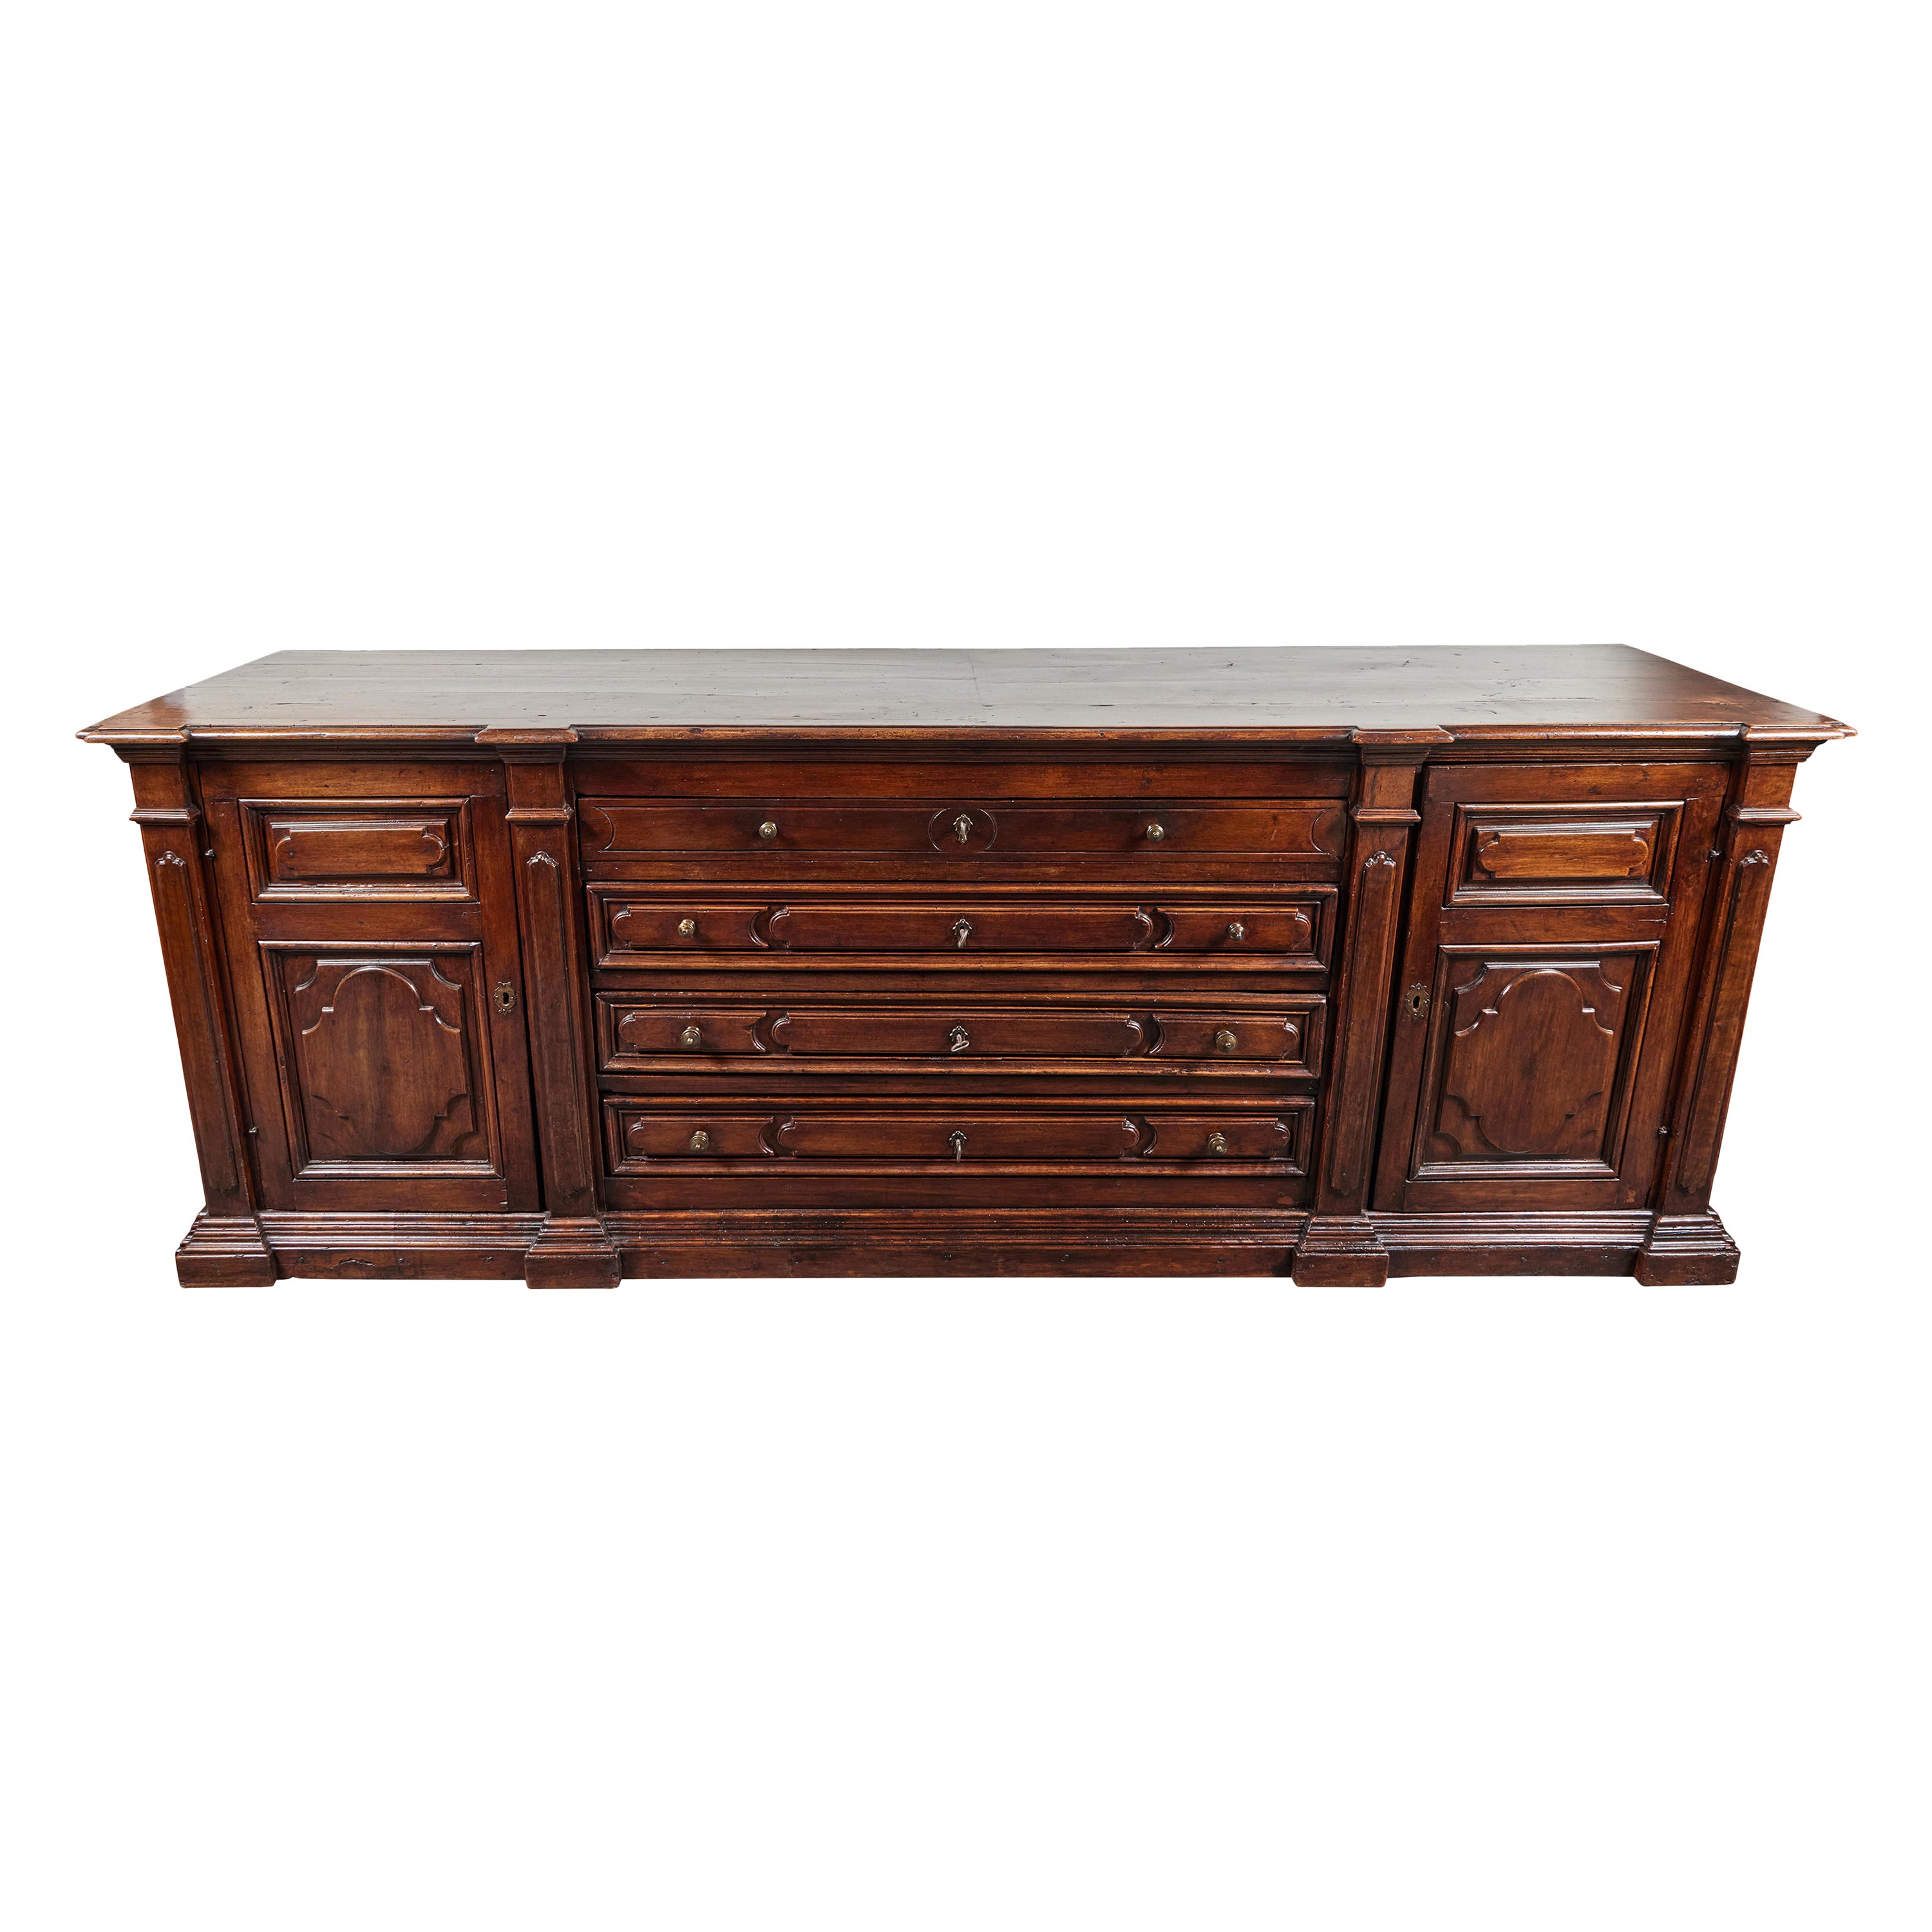 Large, 19th Century, Neoclassical Credenza For Sale